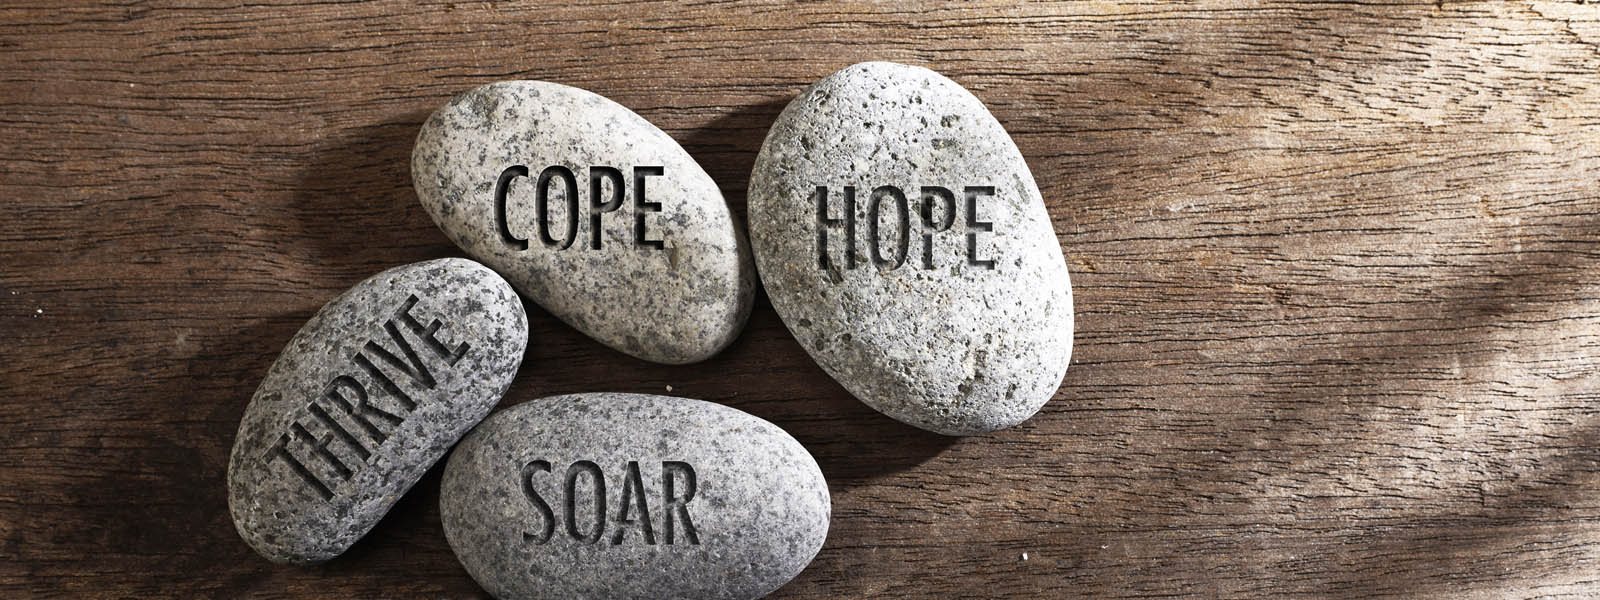 Rocks with encouraging words written on them